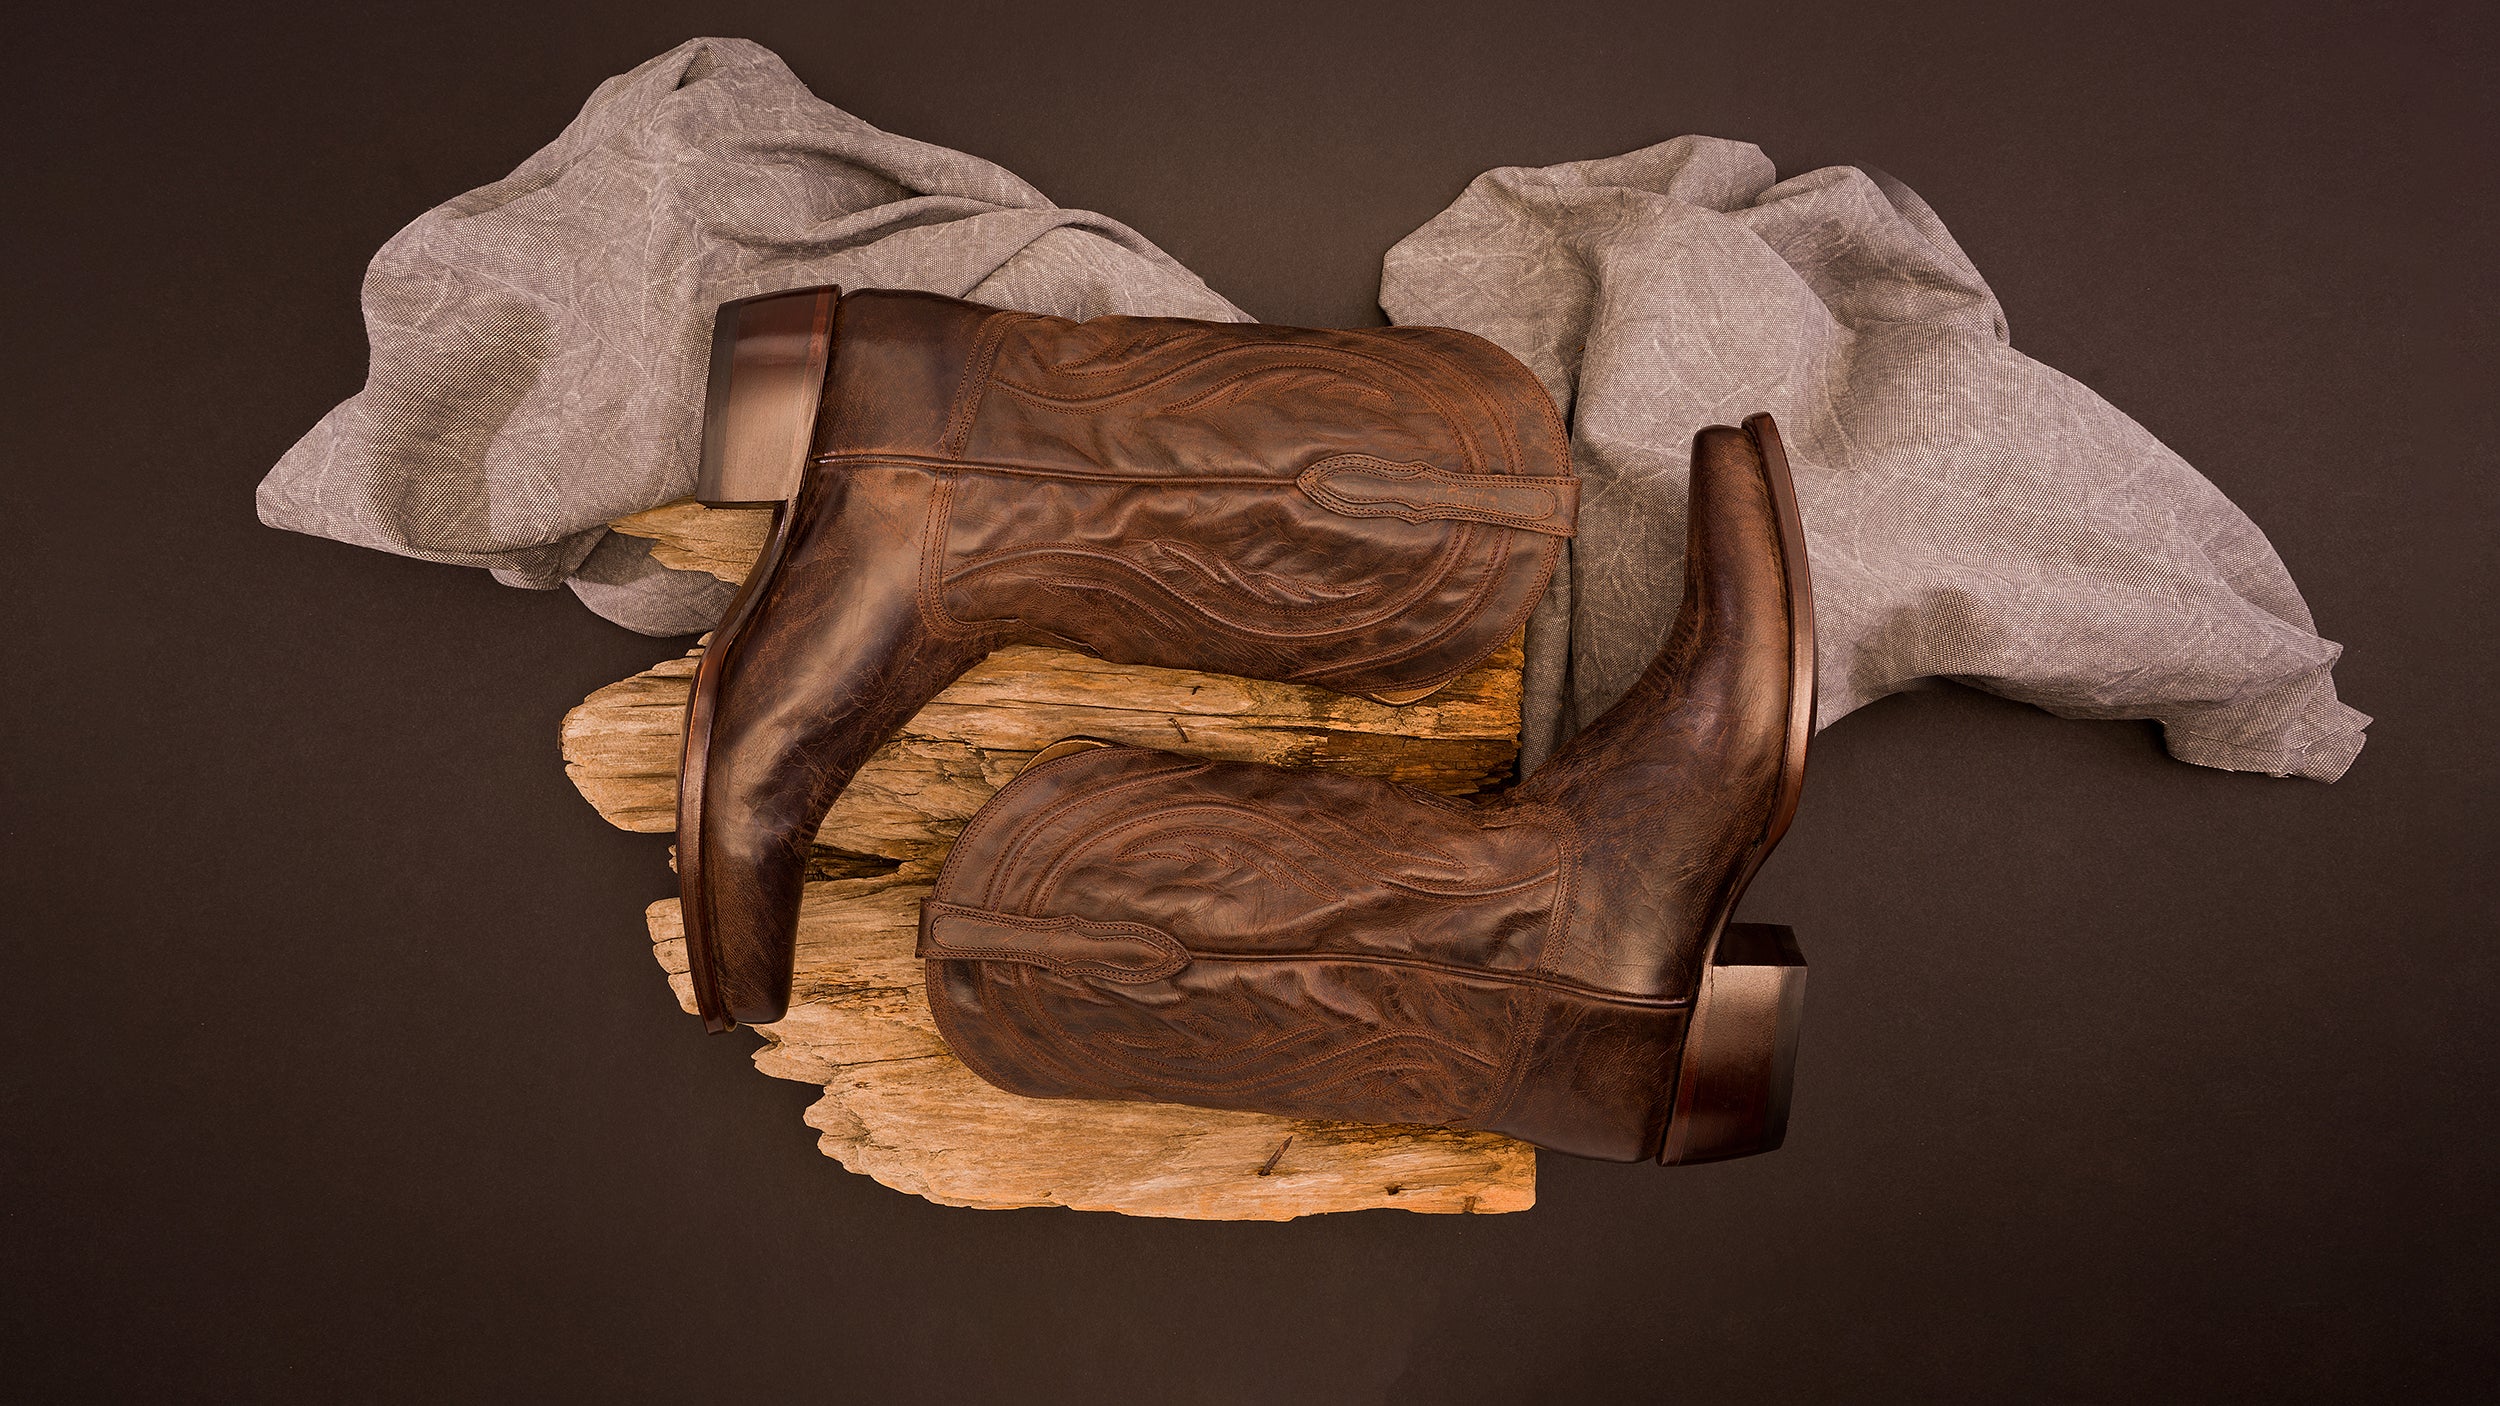 Pair of RUJO boots the Tate on display on a log